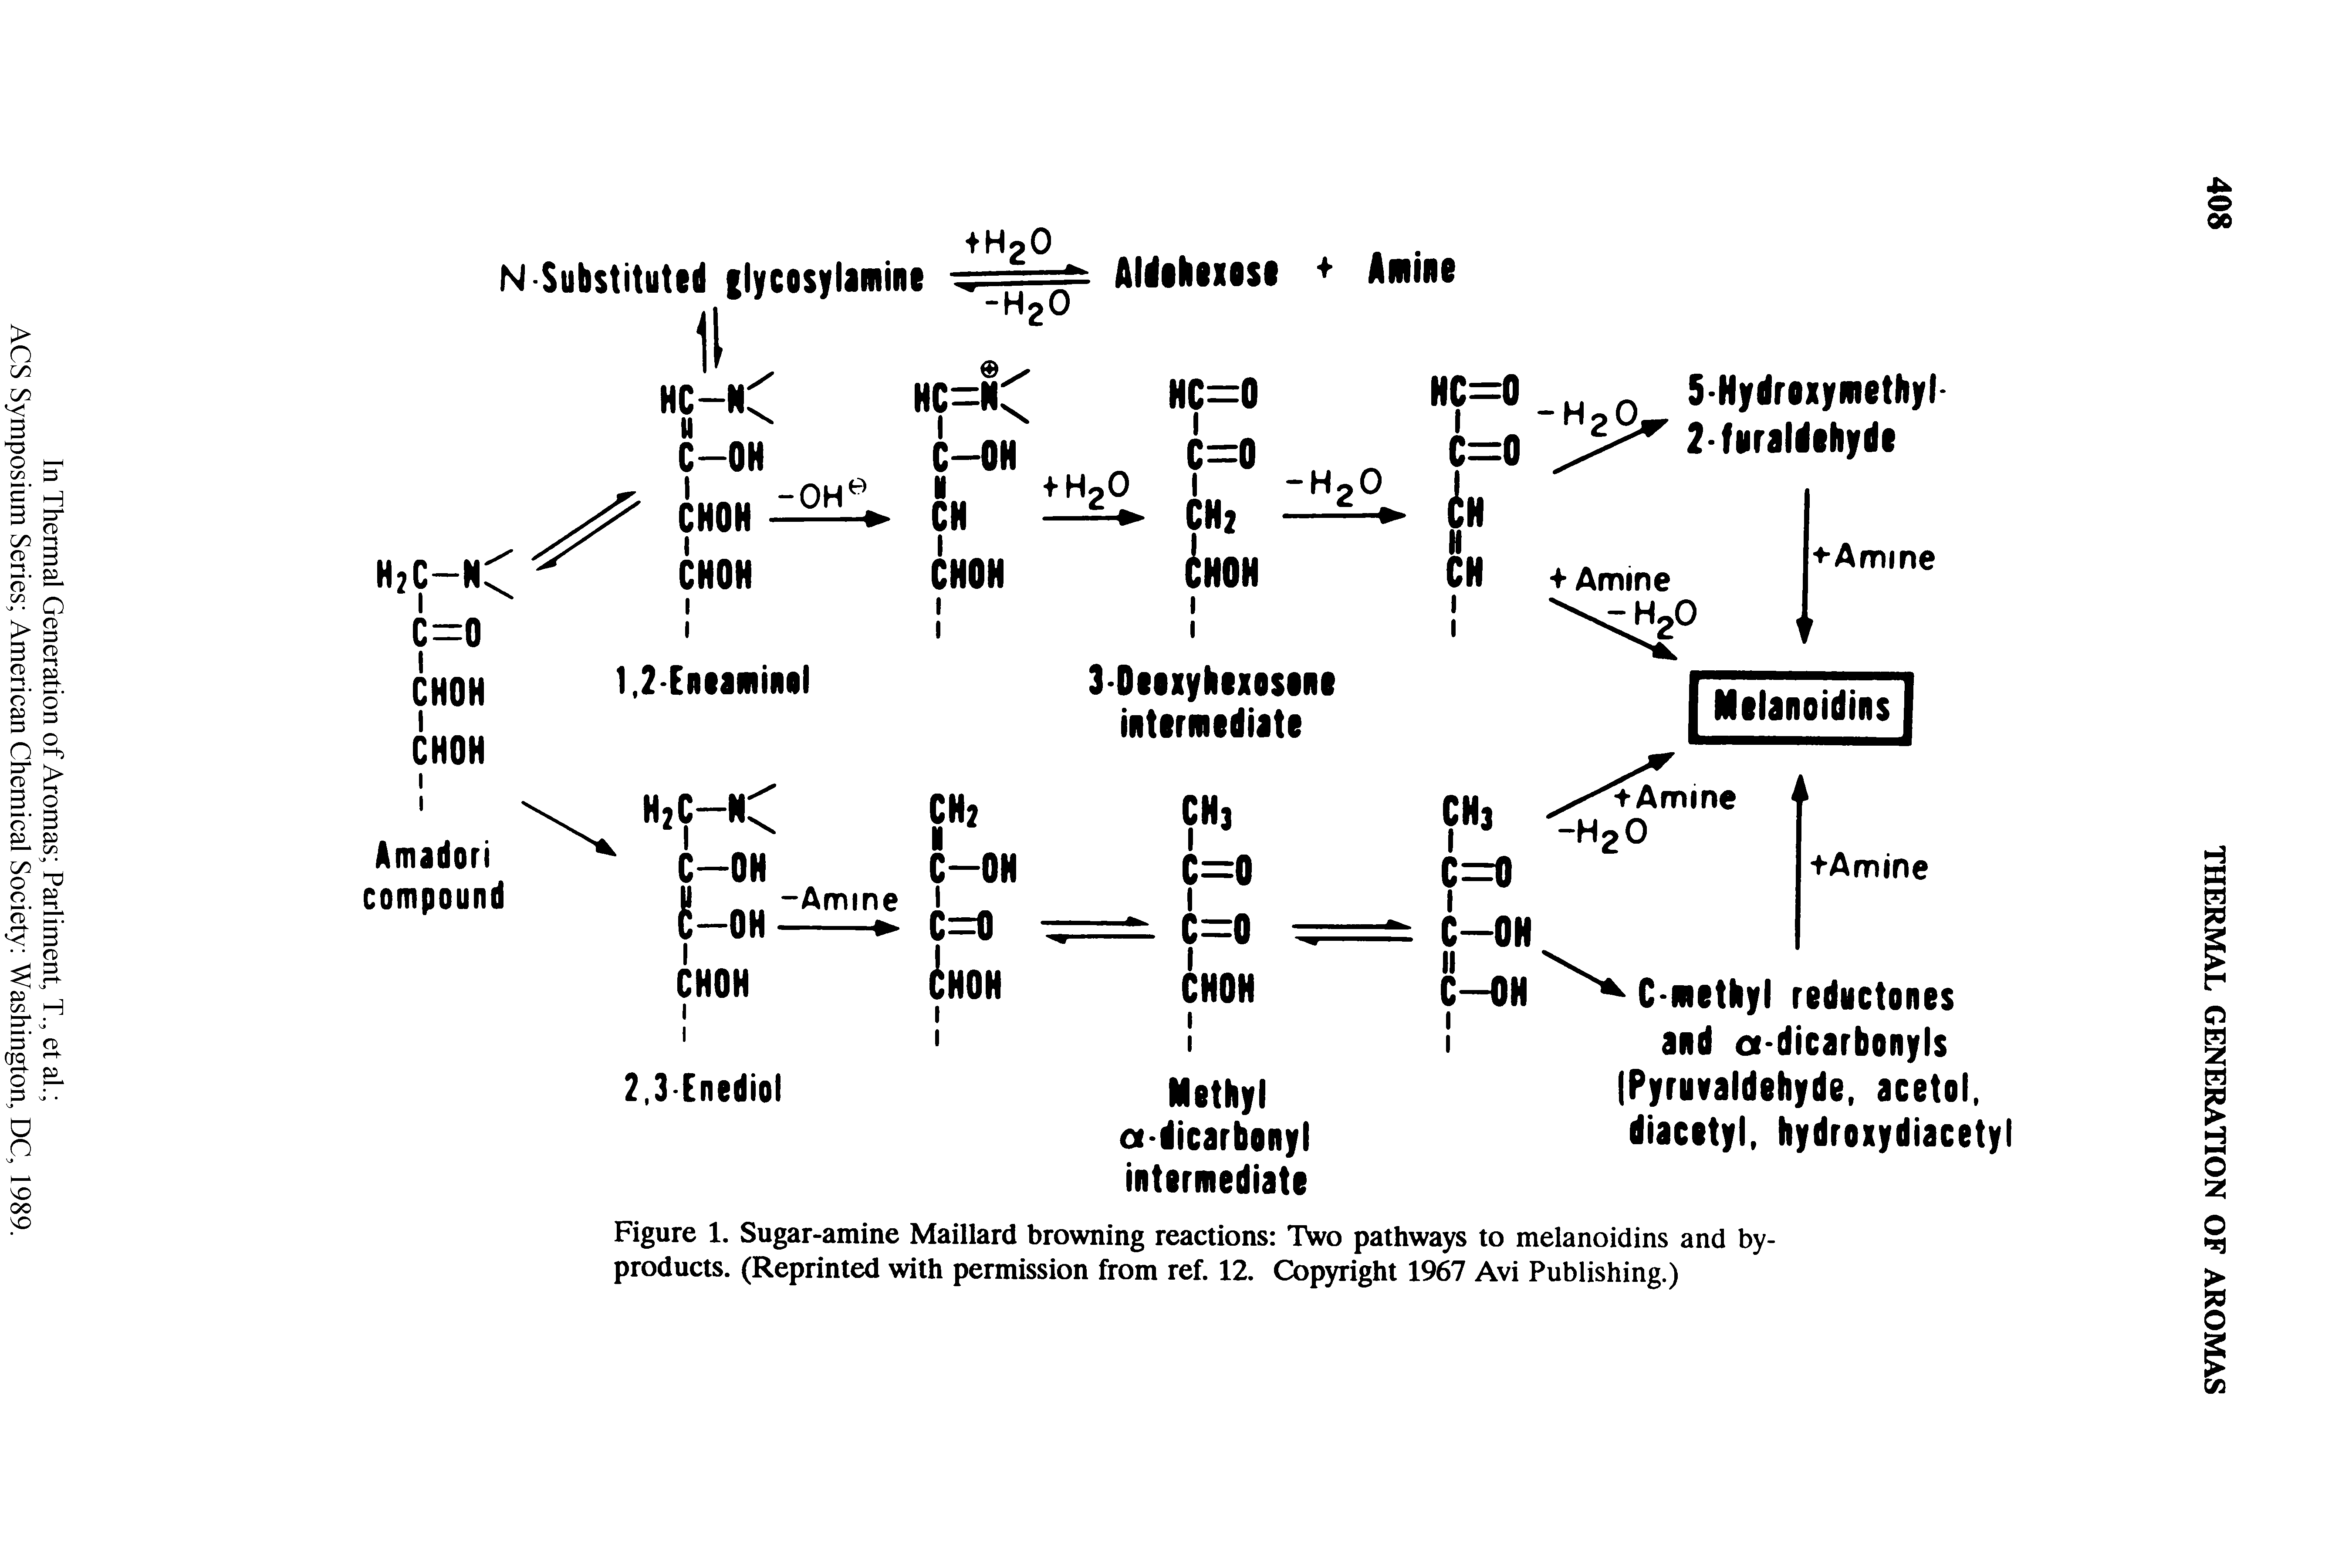 Figure 1. Sugar-amine Maillard browning reactions Two pathways to melanoidins and byproducts. (Reprinted with permission from ref. 12. Copyright 1967 Avi Publishing.)...